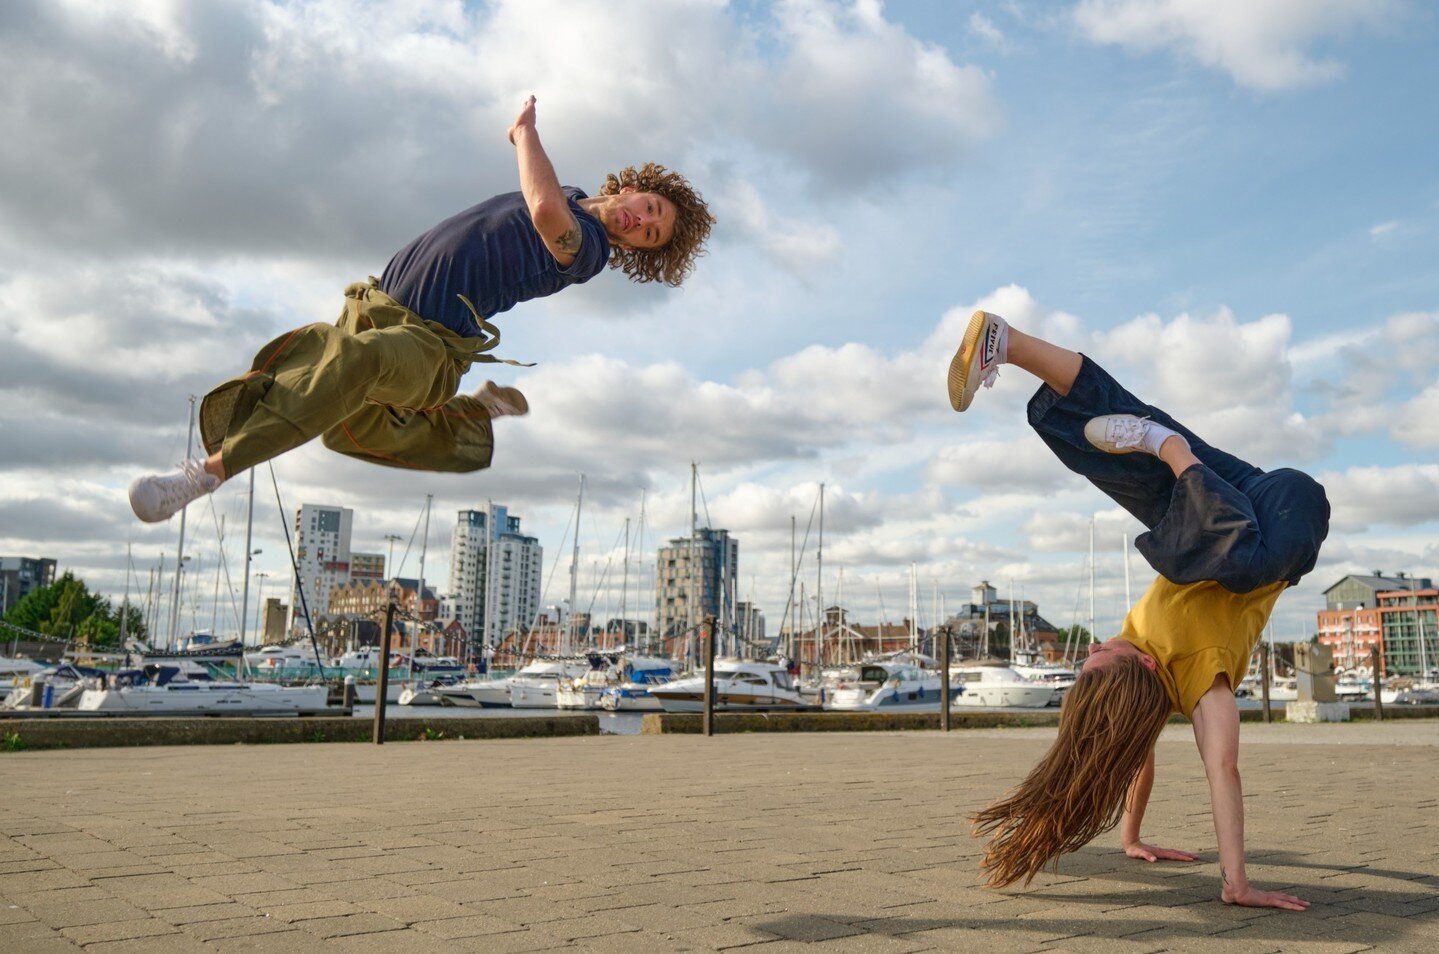 This Saturday come down to Bell Square for another fantastic Outdoor arts performance, @vanhulledt's 'DOVETAIL'! 🤩

Dovetail is a high energy dance duet, fusing elements of &lsquo;breakin&rsquo; and martial arts! A show not to be missed! 🤸

🗓️ Sat